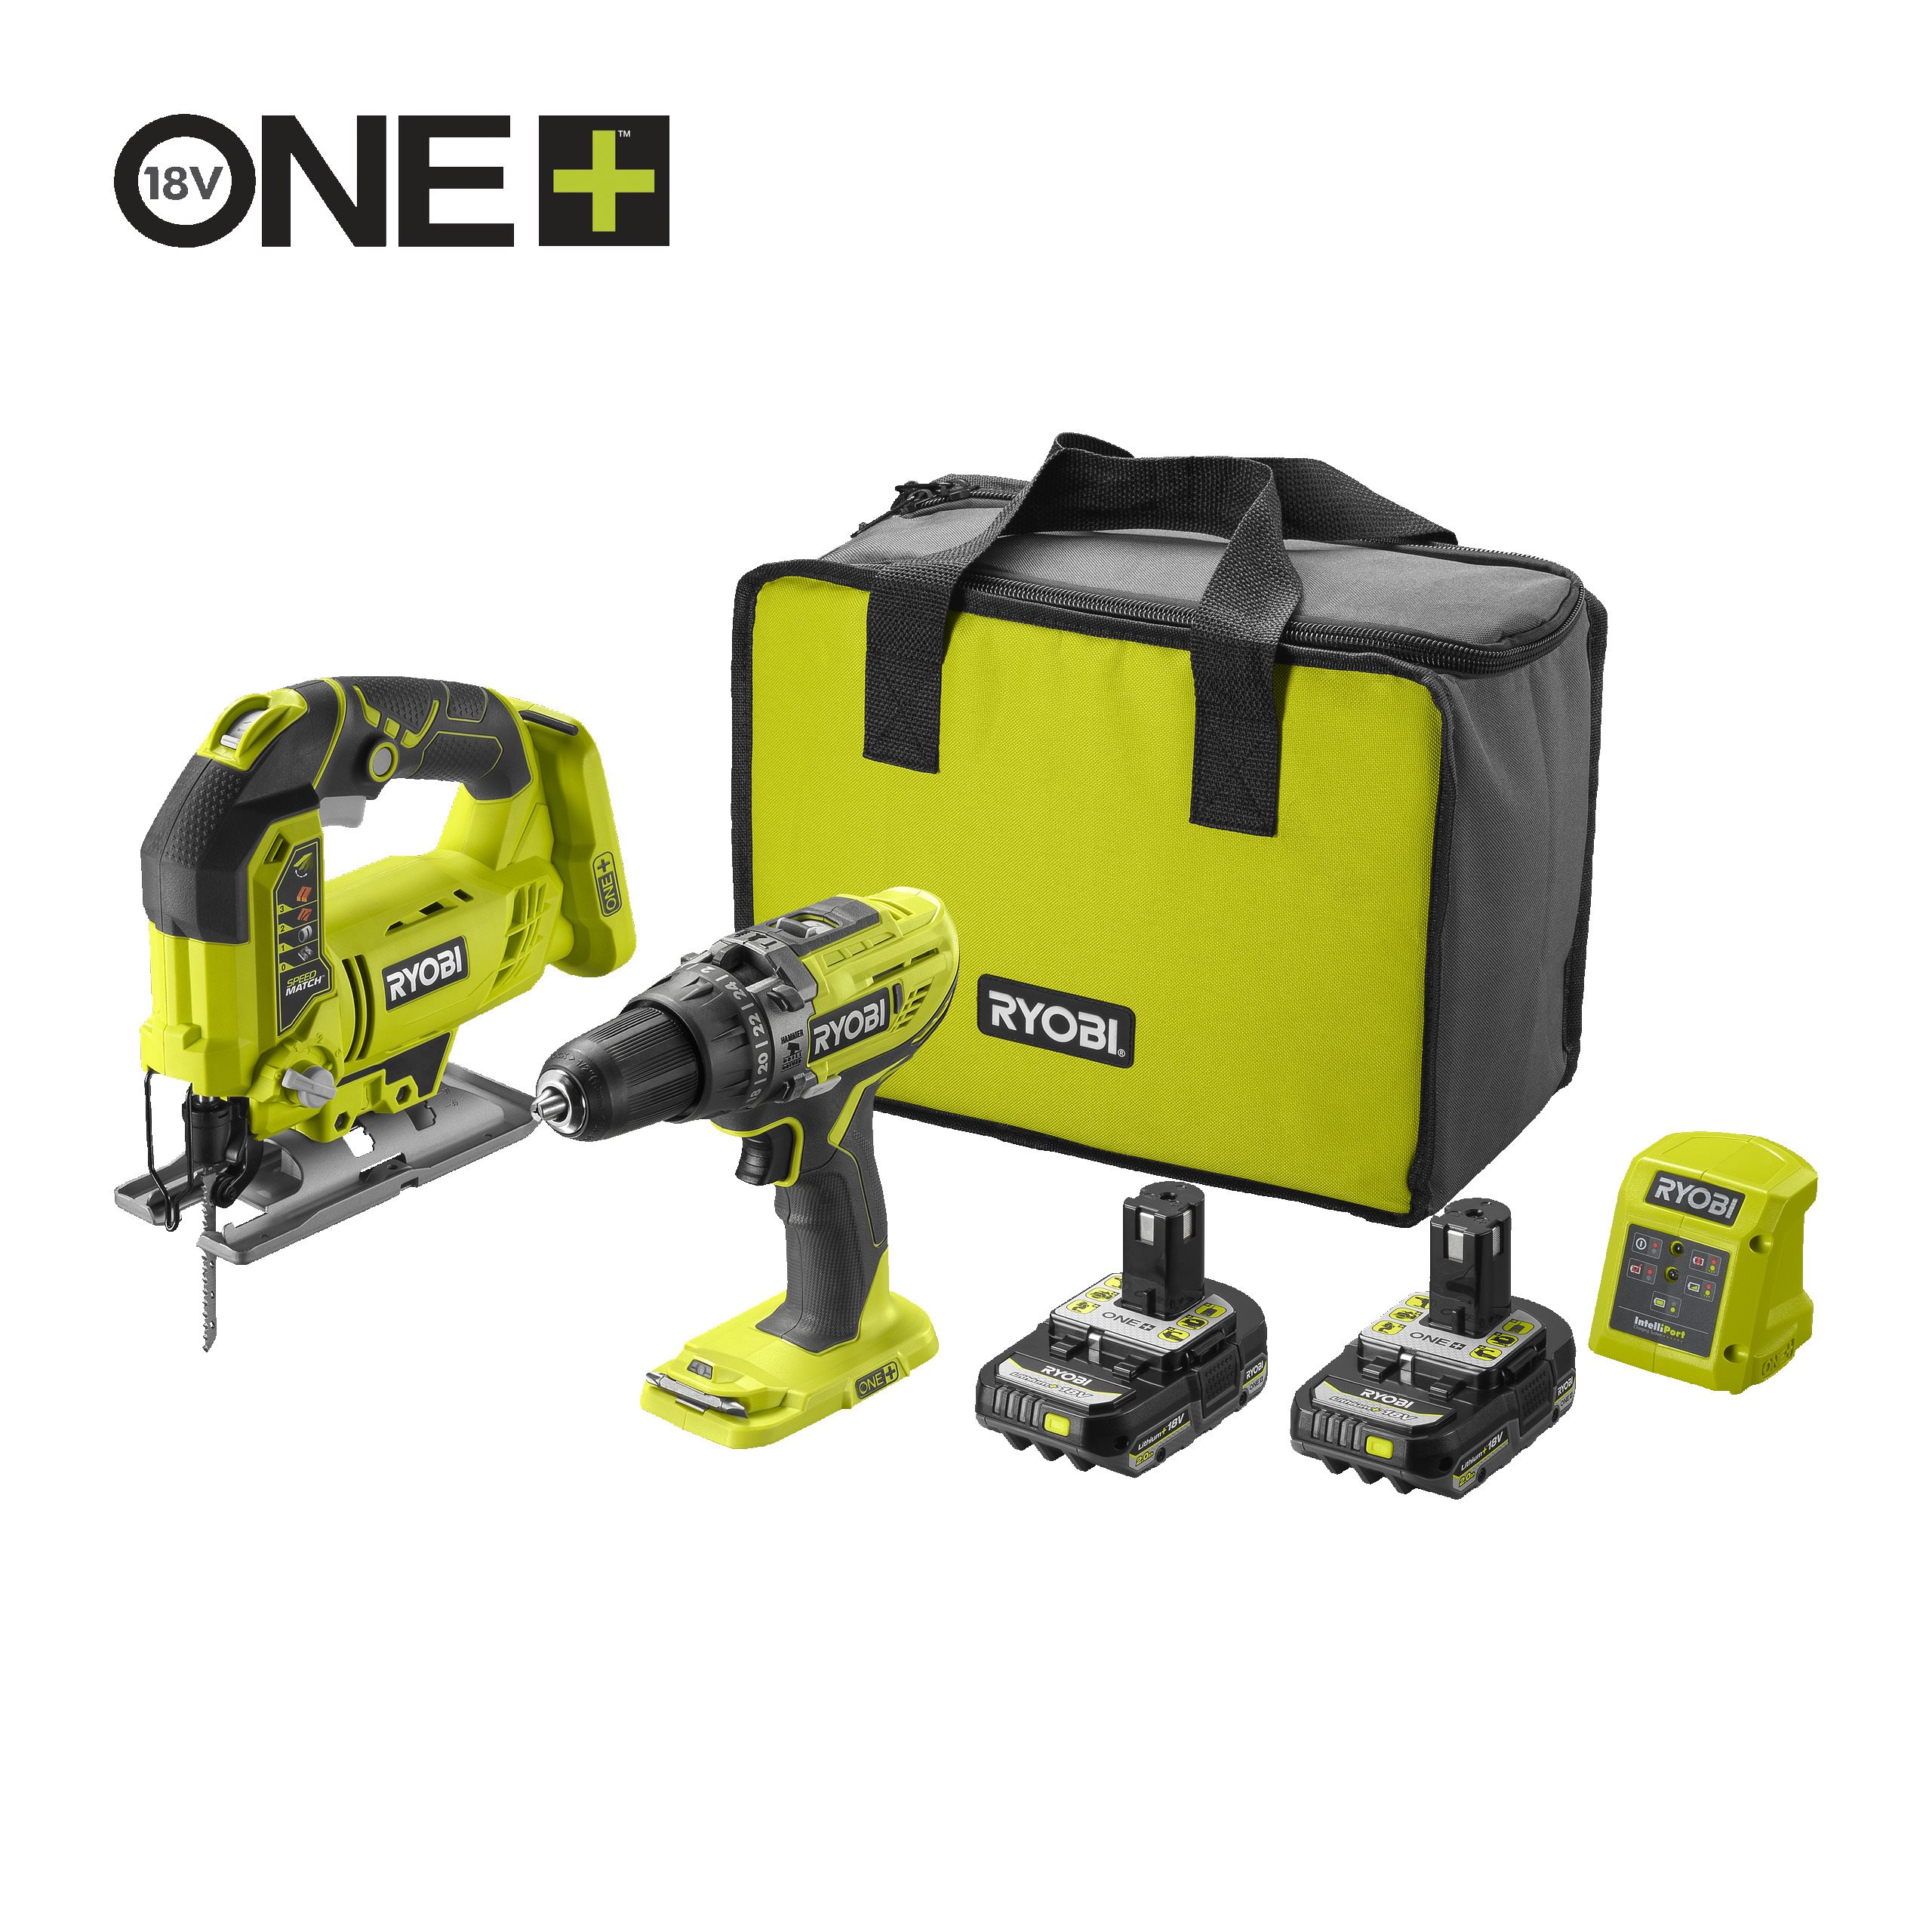 Get a Free ONE+ Tool This Christmas